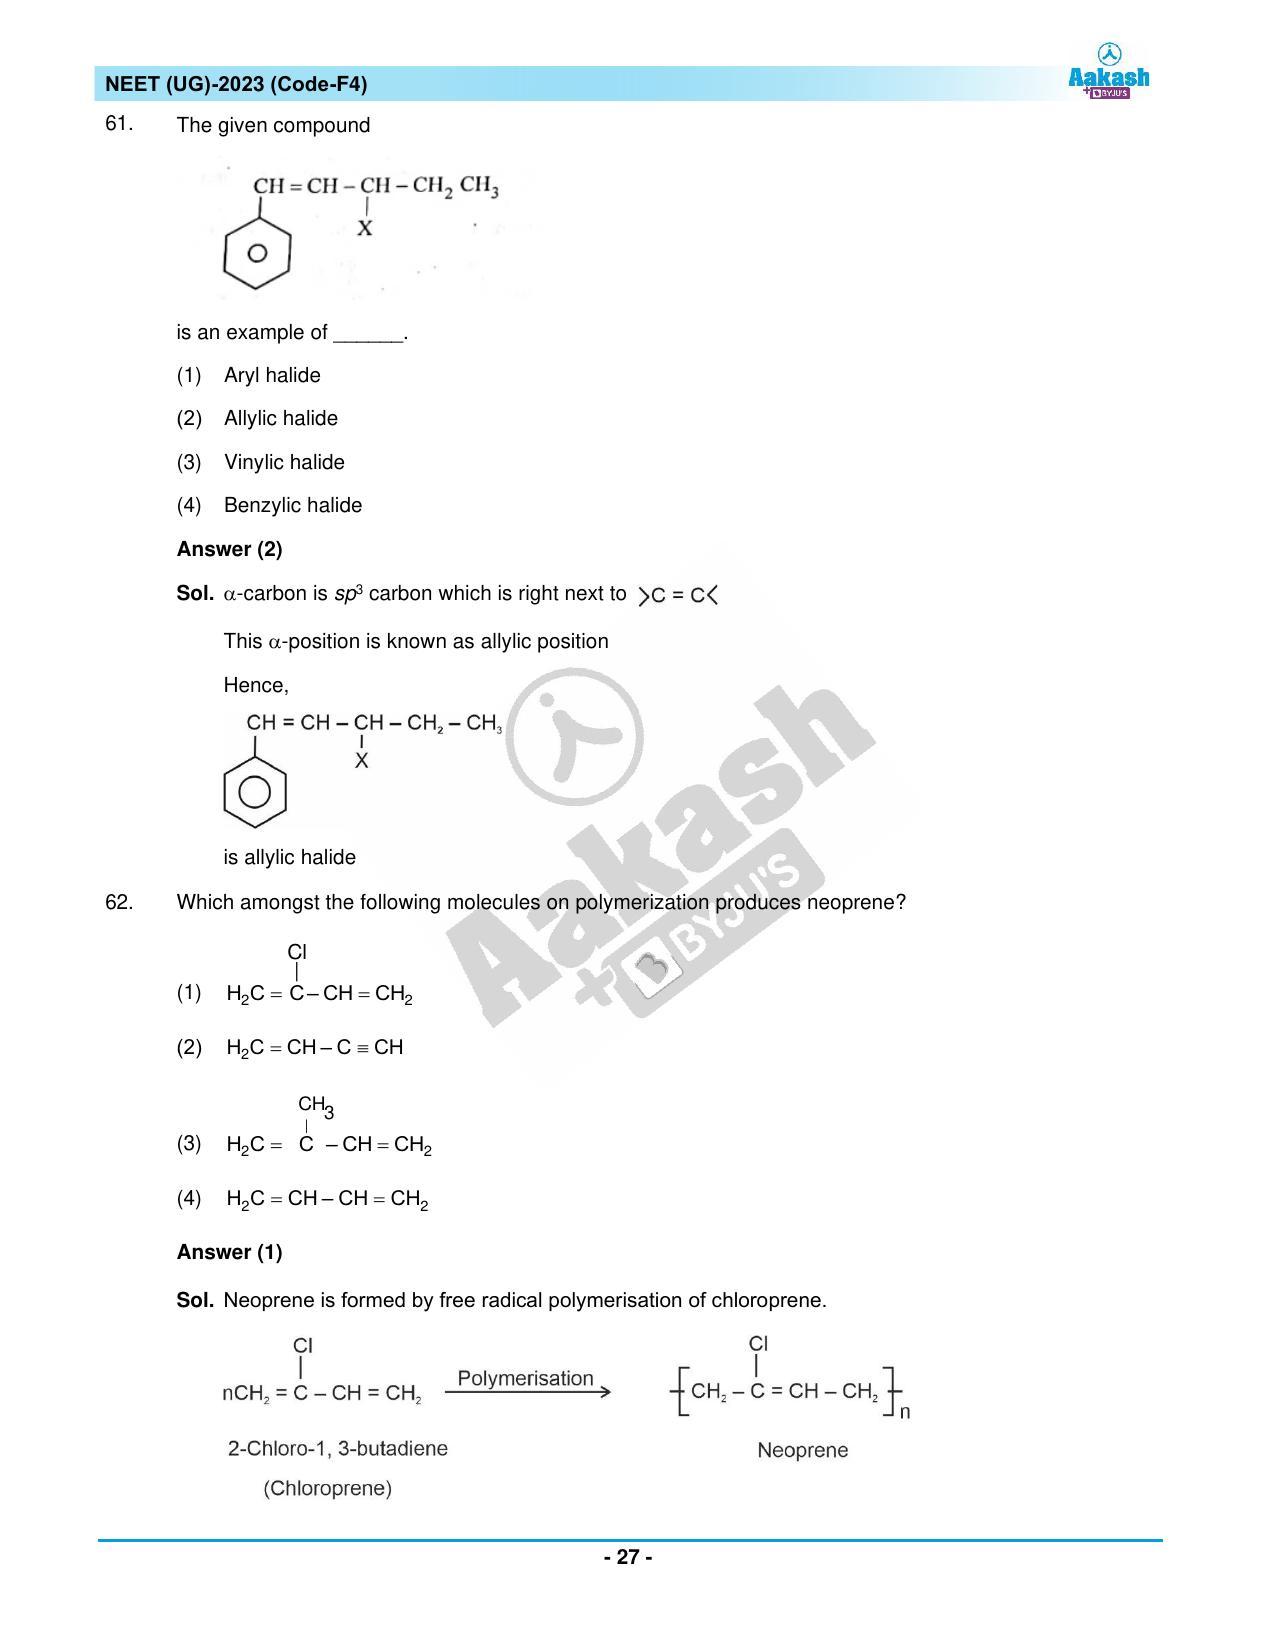 NEET 2023 Question Paper F4 - Page 27